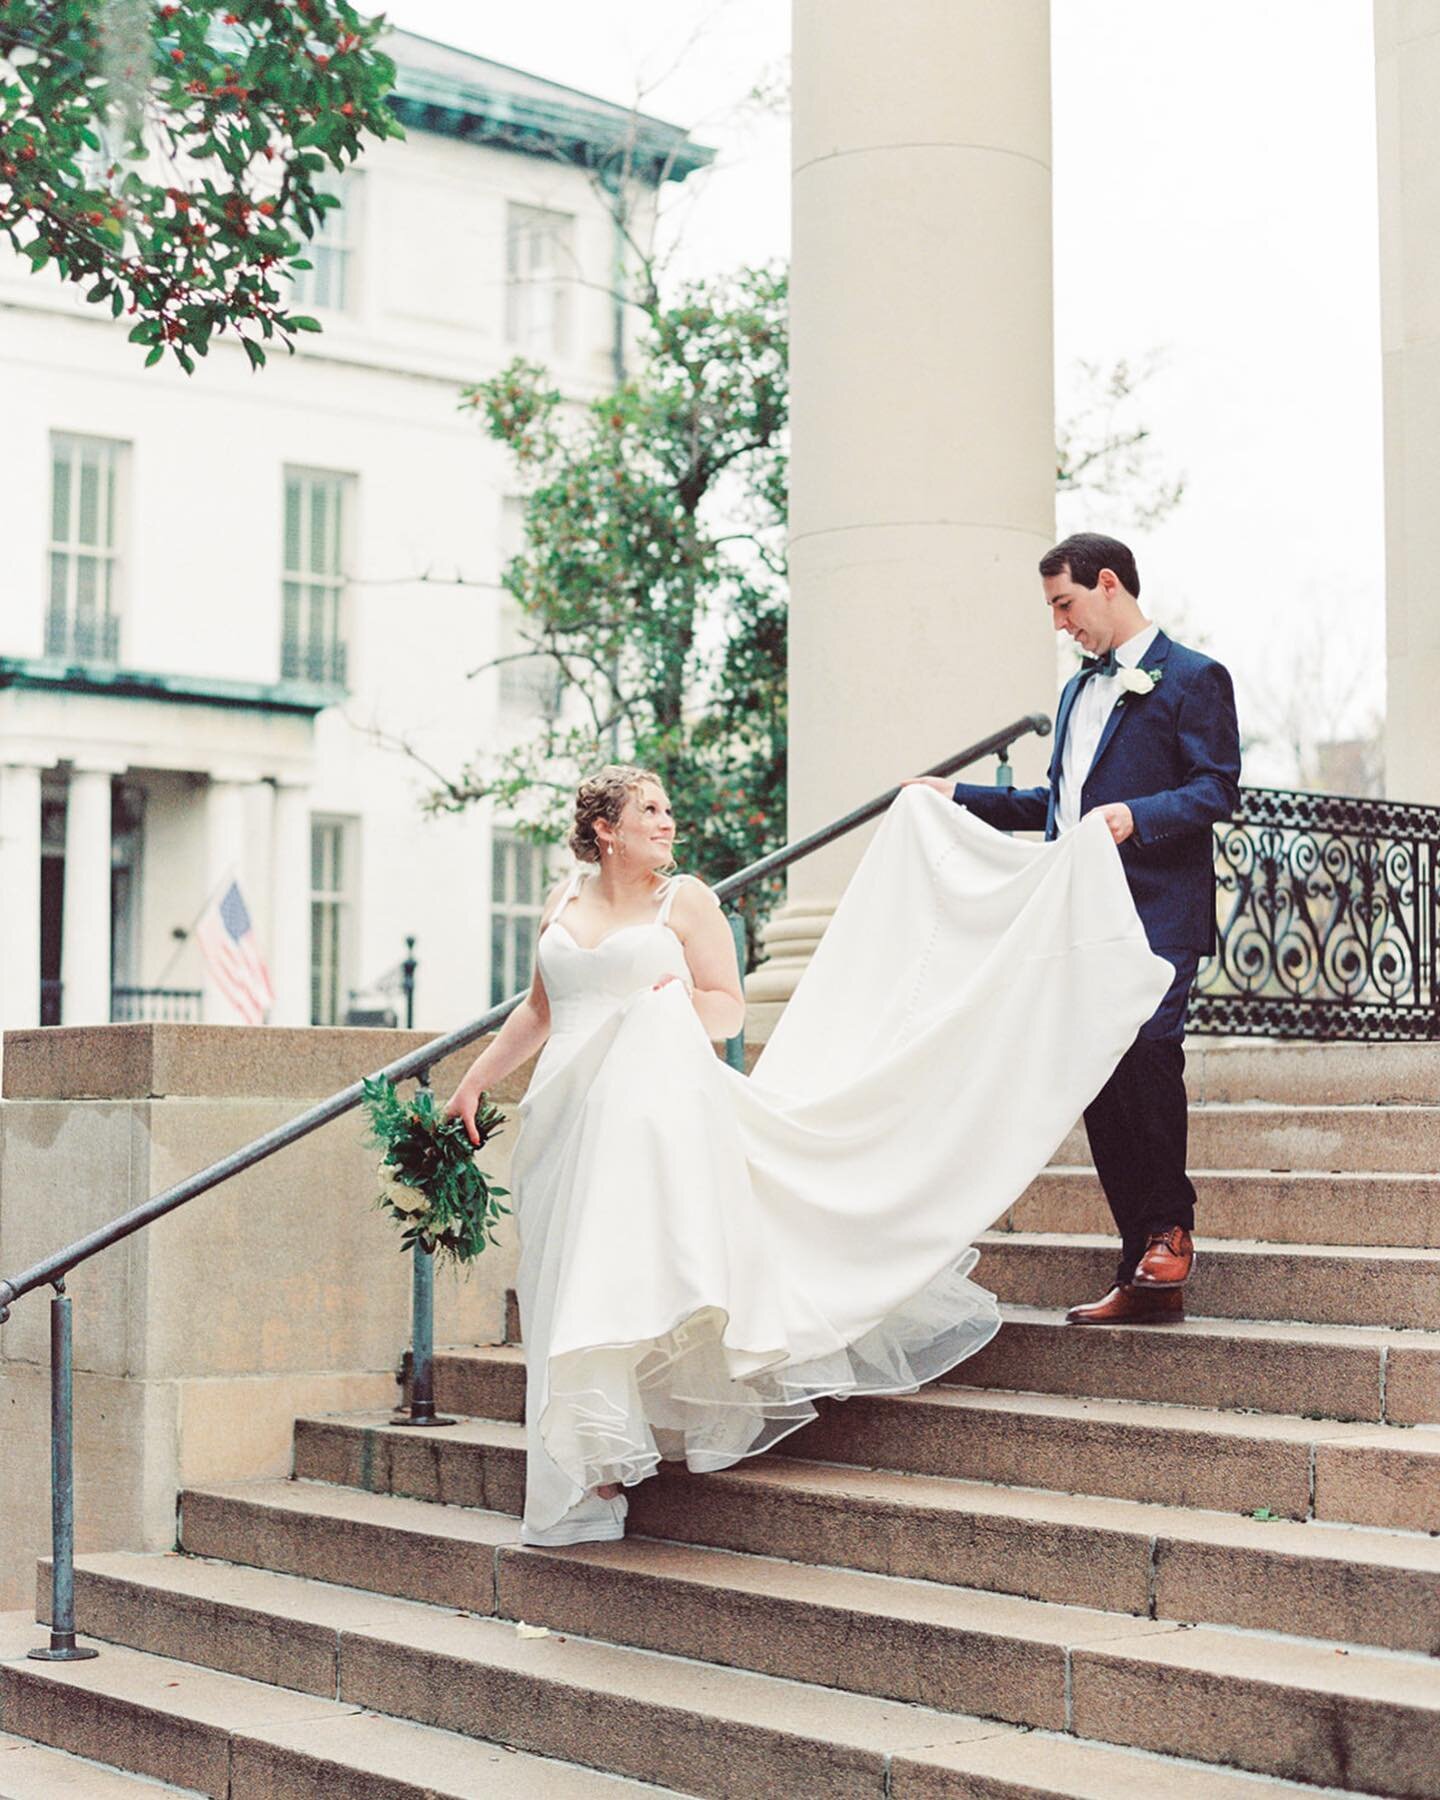 weddings should always be captured on film in our humble opinion&hellip; 

you don&rsquo;t have to take our word for it, tho. just take a peek at this shot of #iandbcouple KYLIE + BRAD&rsquo;S downtown savannah wedding&ndash; it&rsquo;s all the convi